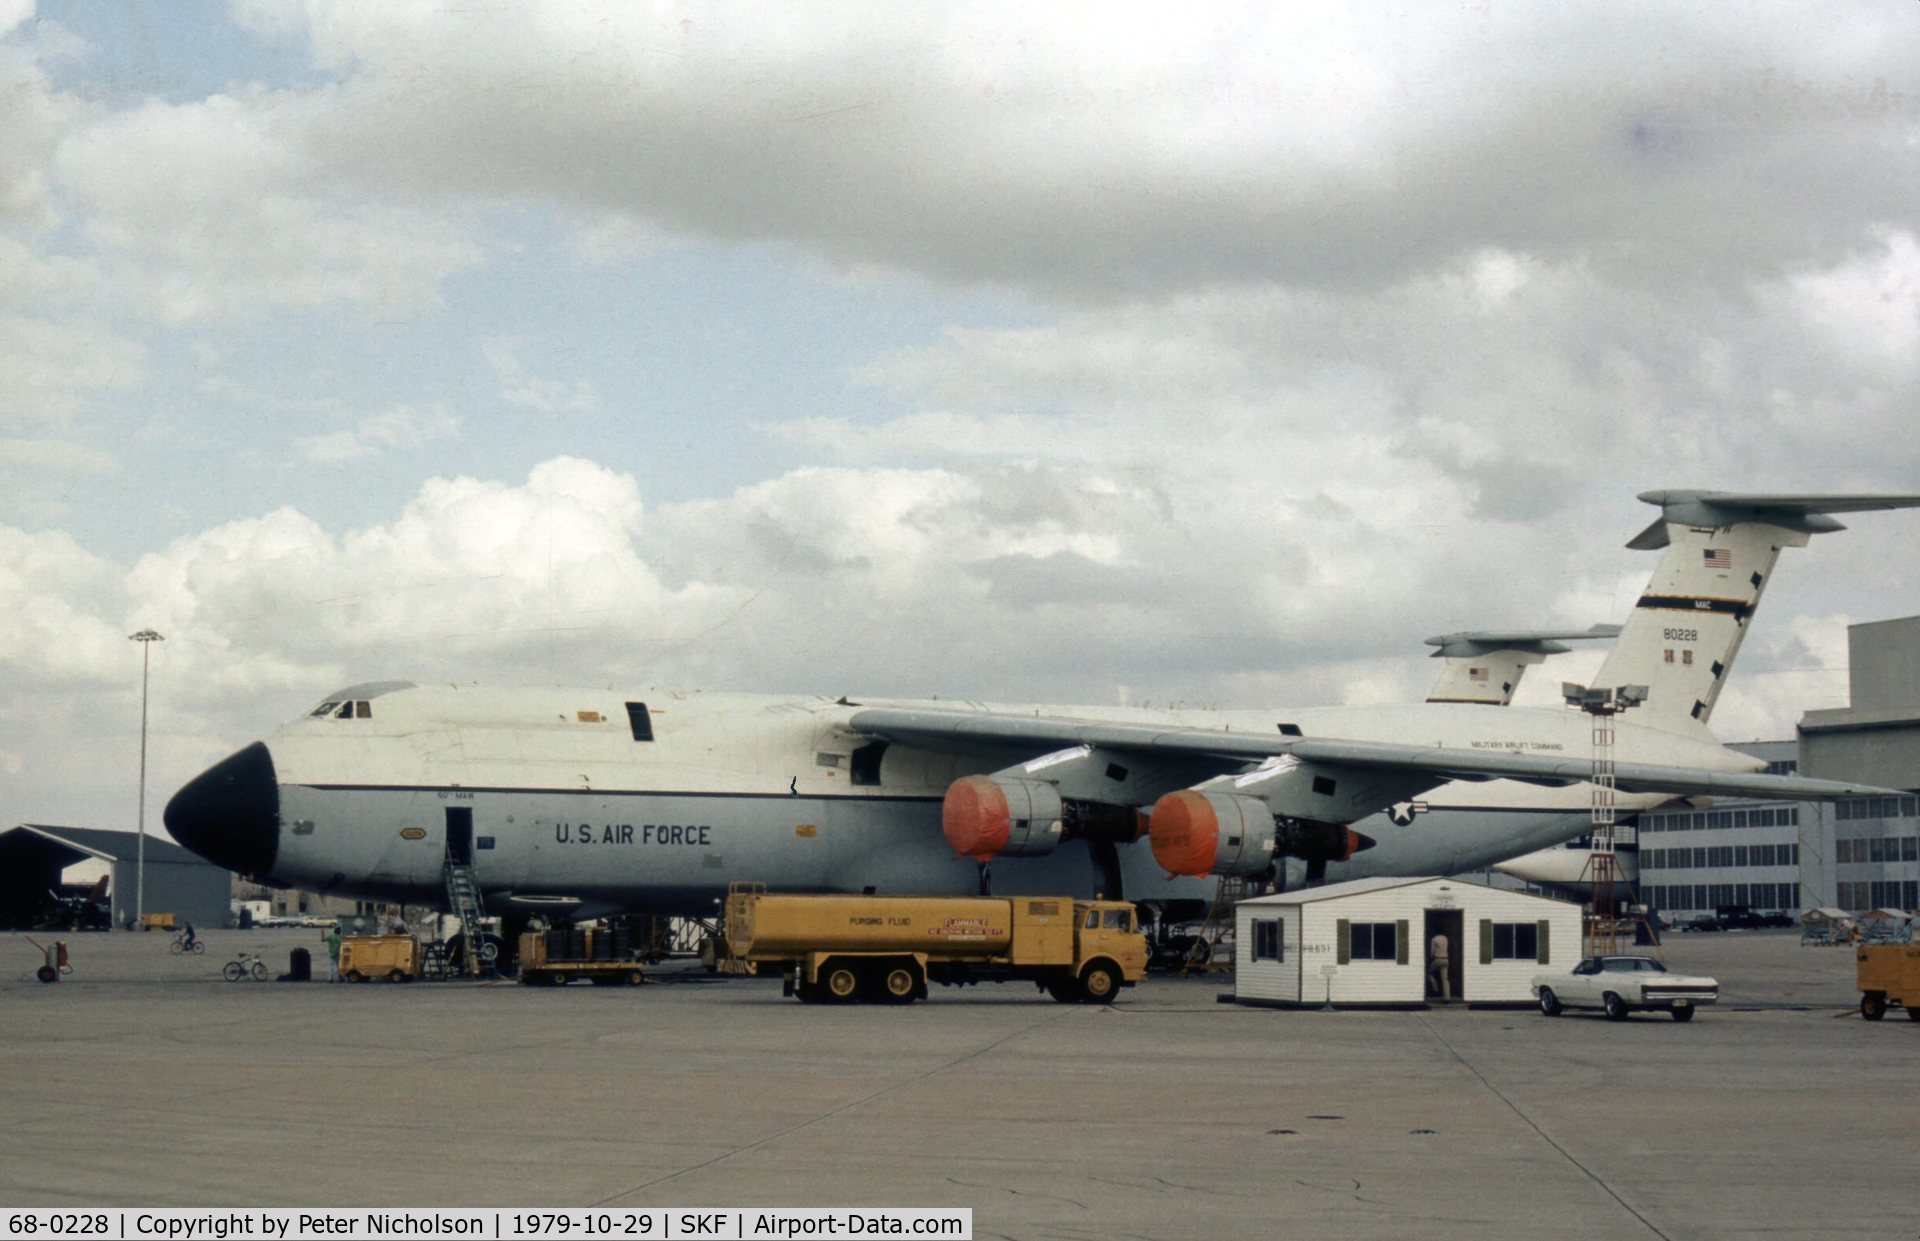 68-0228, 1968 Lockheed C-5A Galaxy C/N 500-0031, C-5A Galaxy of 60th Military Airlift Wing seen at Kelly AFB in October 1979.